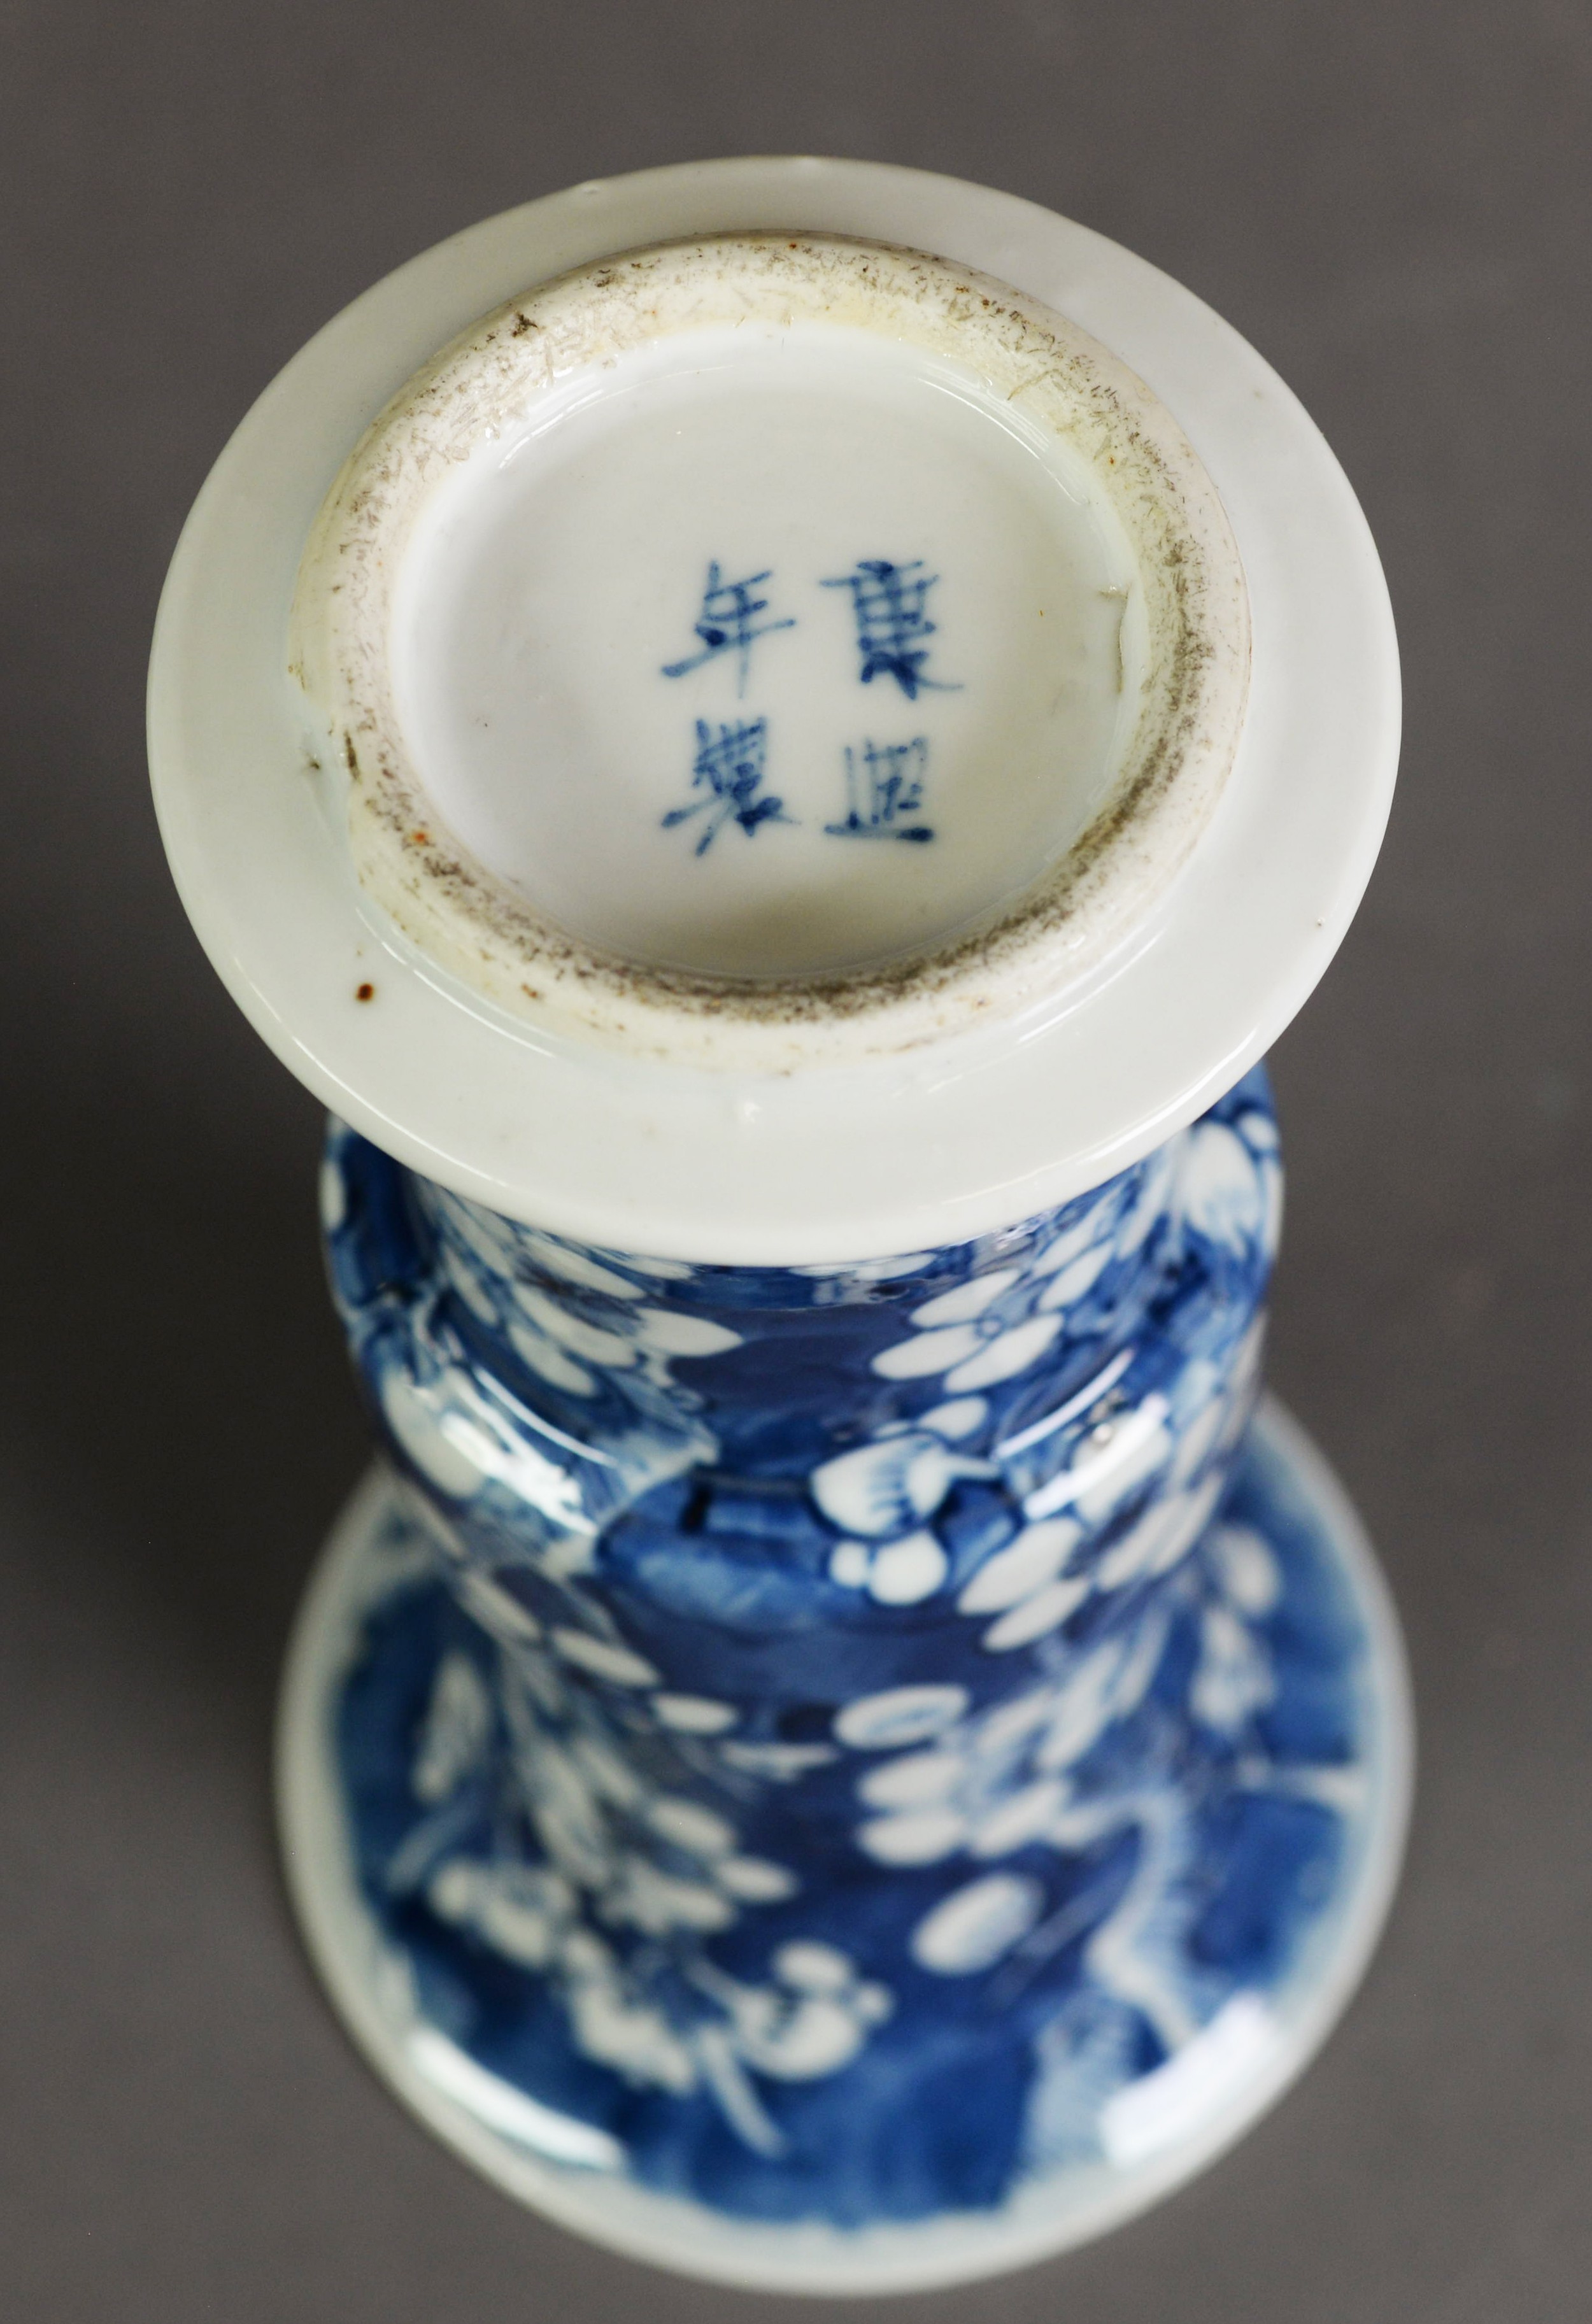 CHINESE LATE QING DYNASTY PORCELAIN GU SHAPE VASE, with everted rim, painted in underglaze blue with - Image 3 of 3